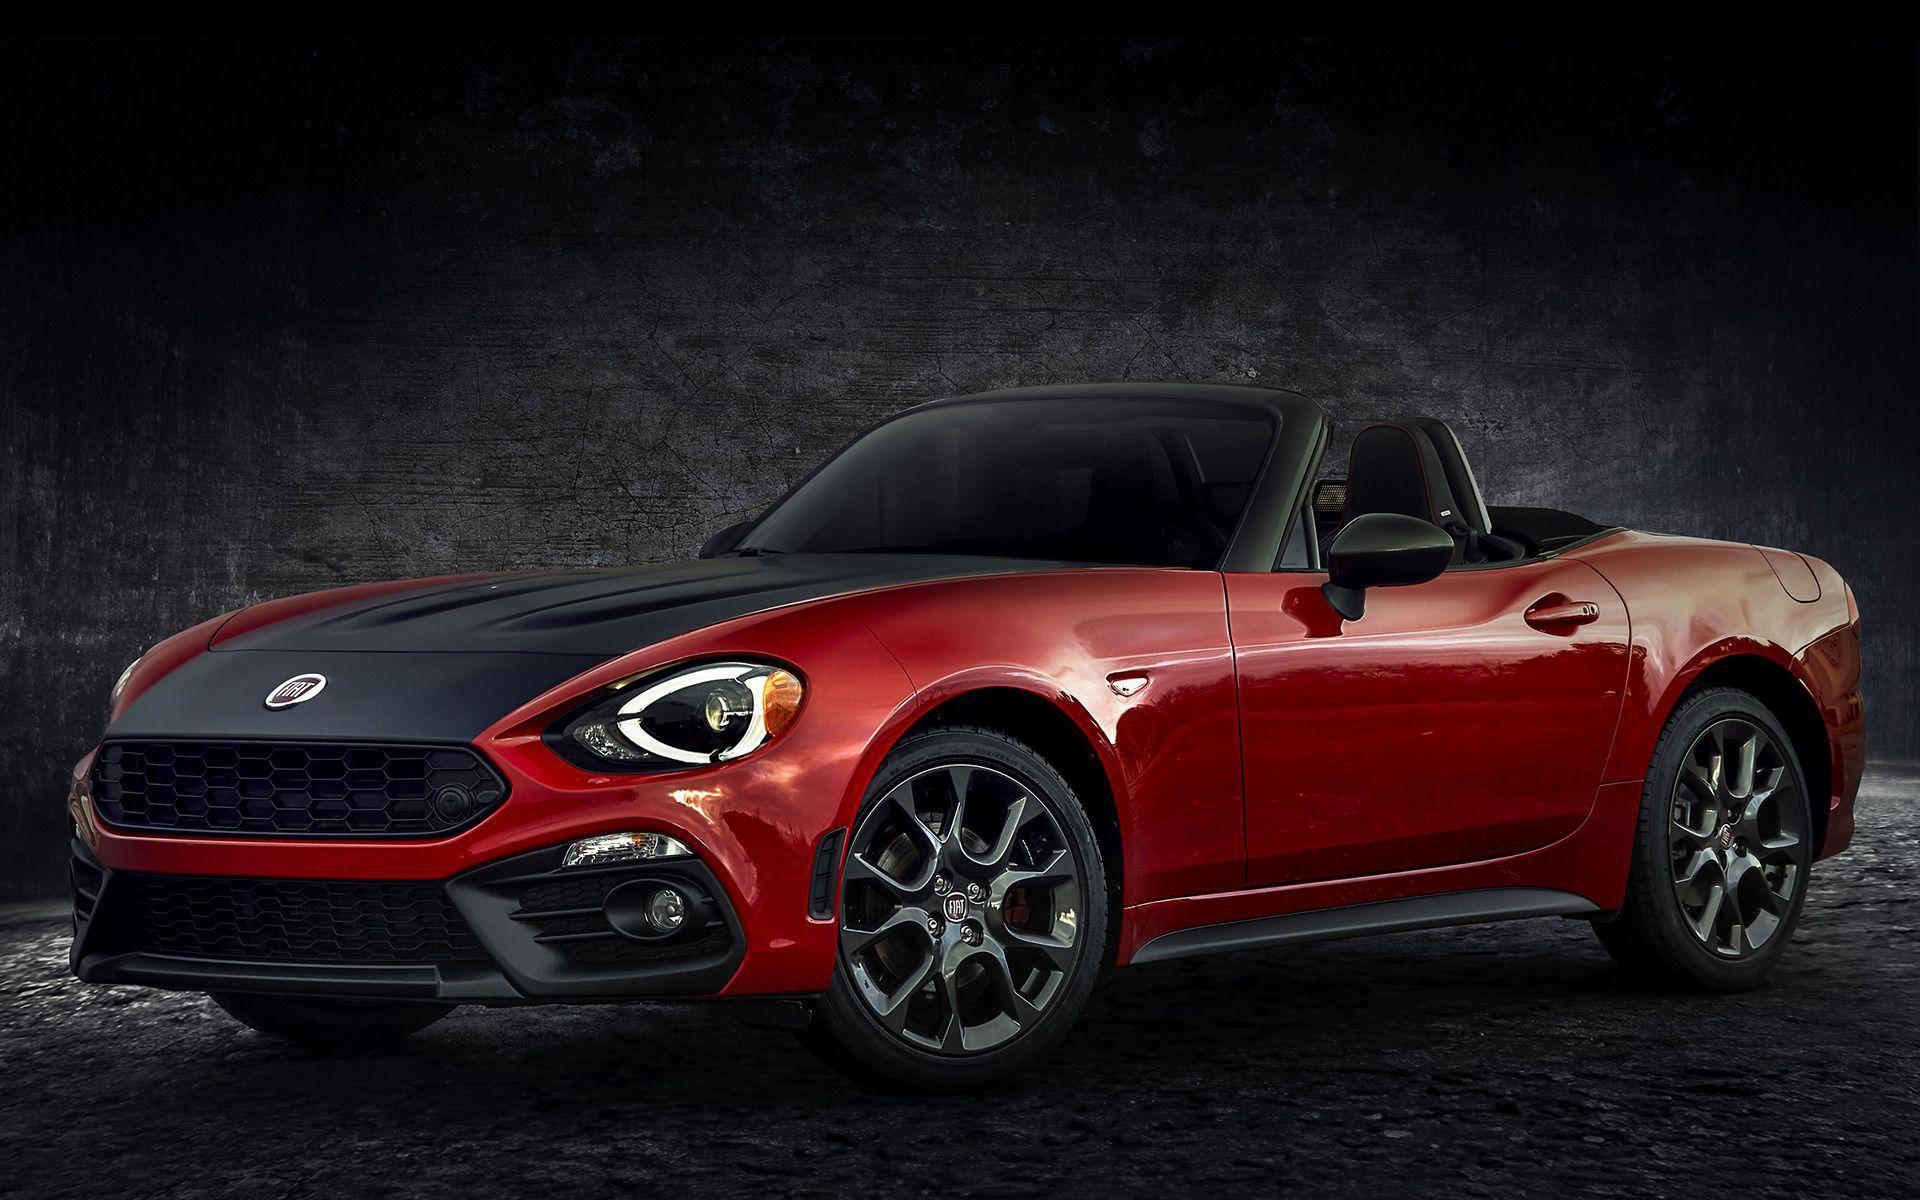 Fiat 124 Spider Abarth (2017) US Wallpaper and HD Image